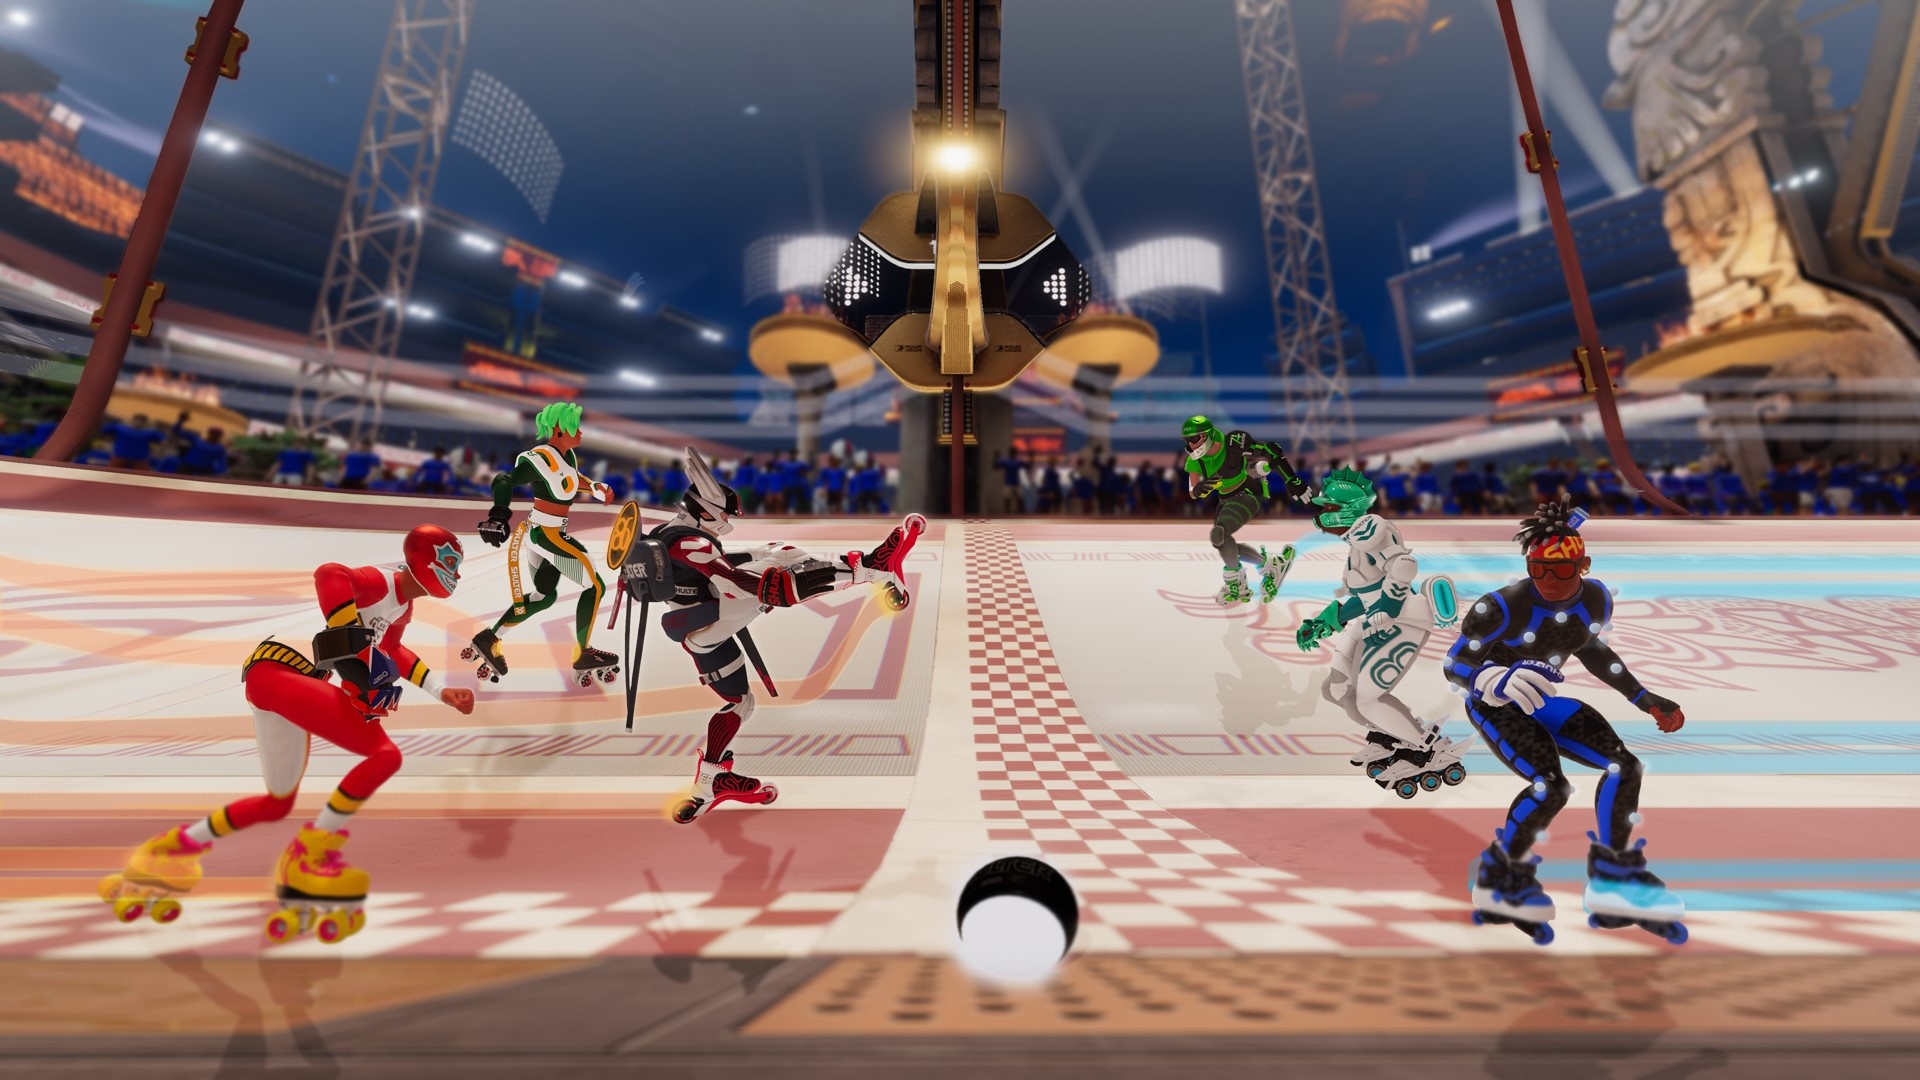 Roller Champions (Game): Gameplay: teams compete to score goals, Free-to-play, Skill-based. 1920x1080 Full HD Background.